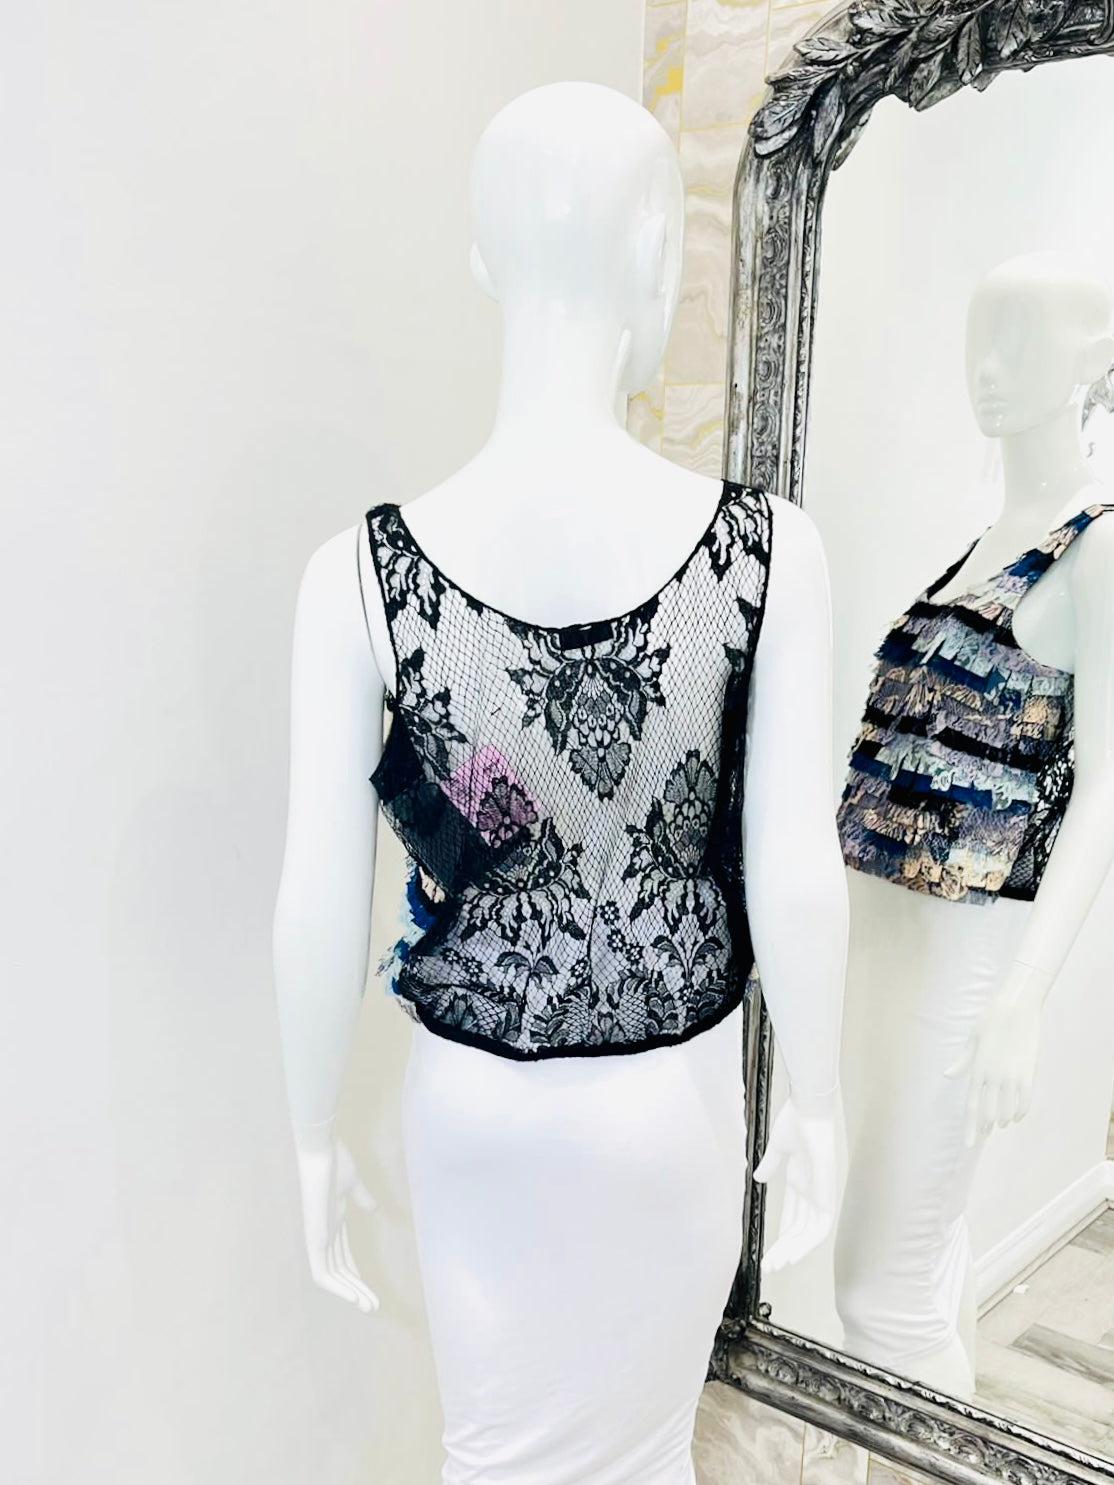 Chanel Paris Seoul Lace Top In Excellent Condition For Sale In London, GB